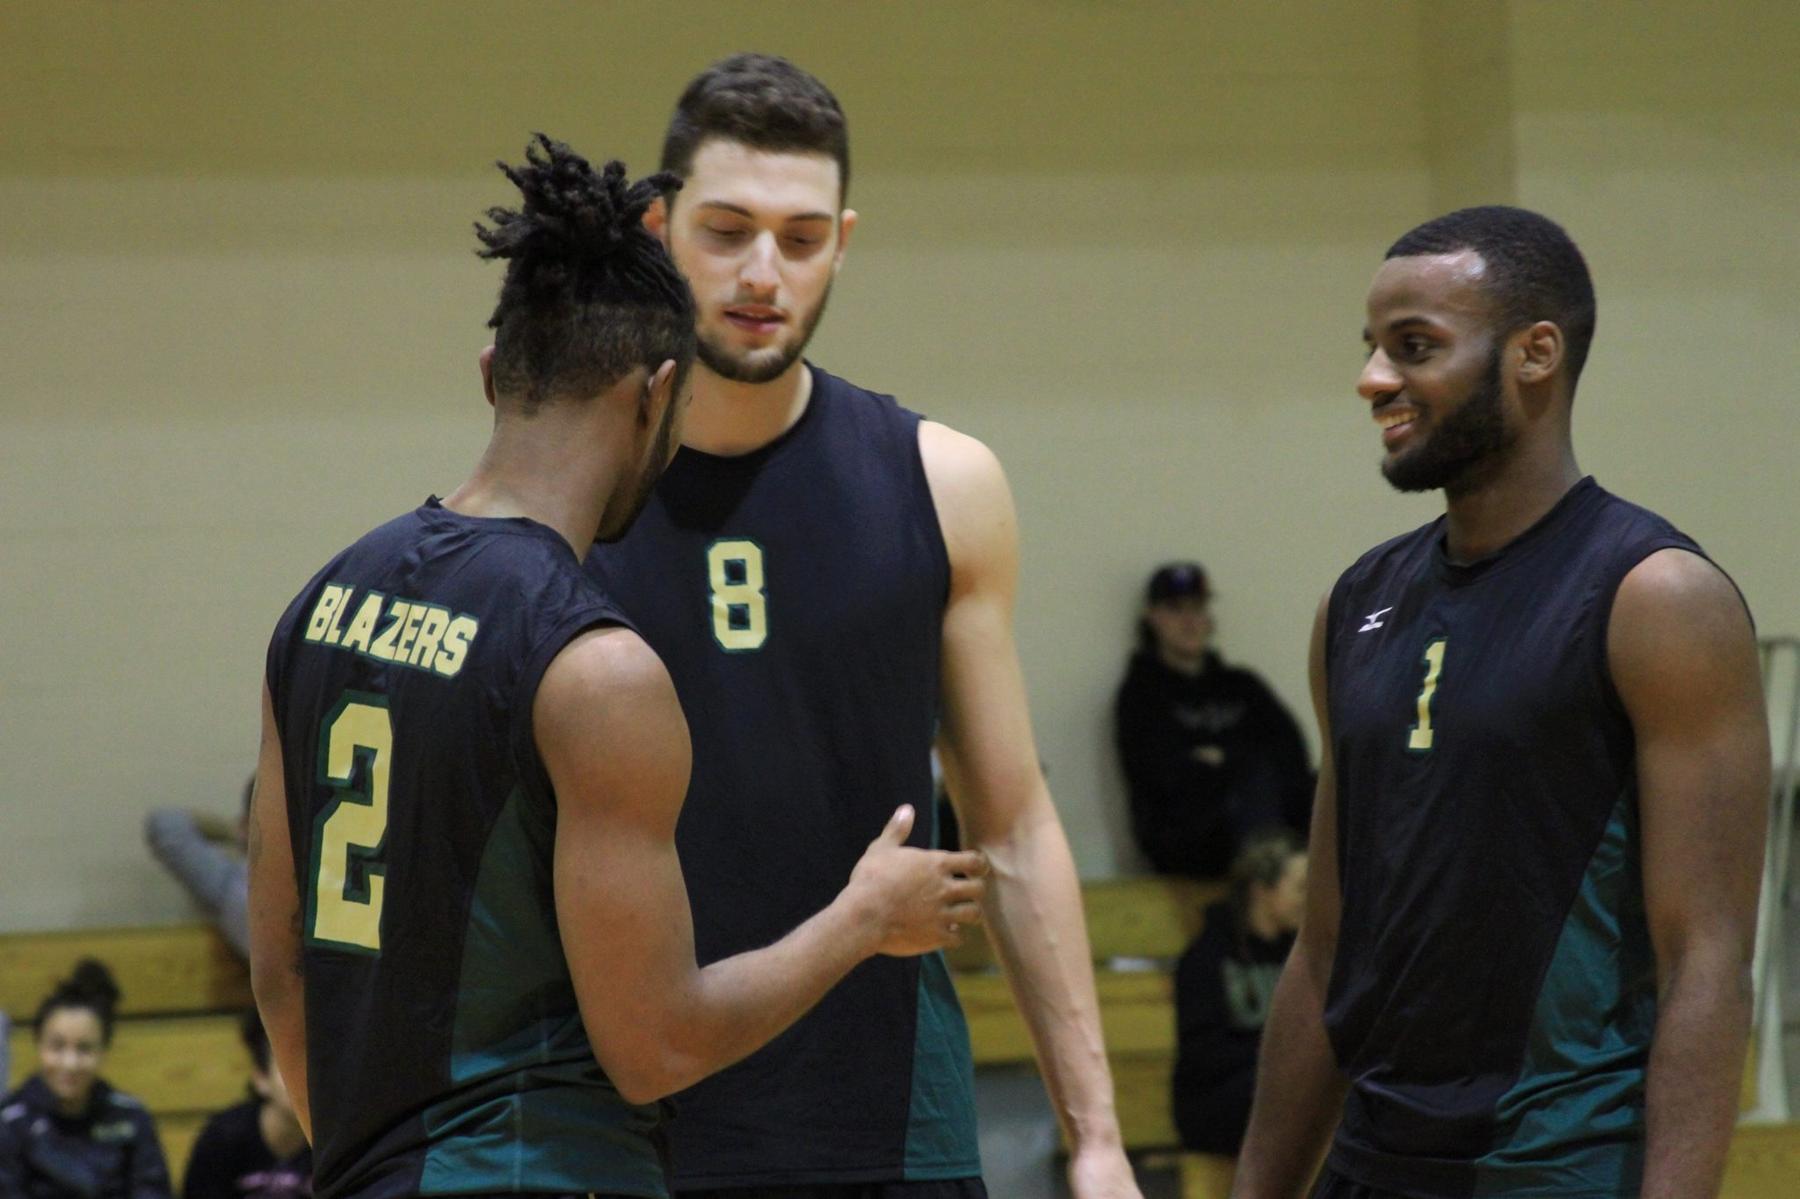 Men's Volleyball Sweeps Day Two at Keuka Tournament